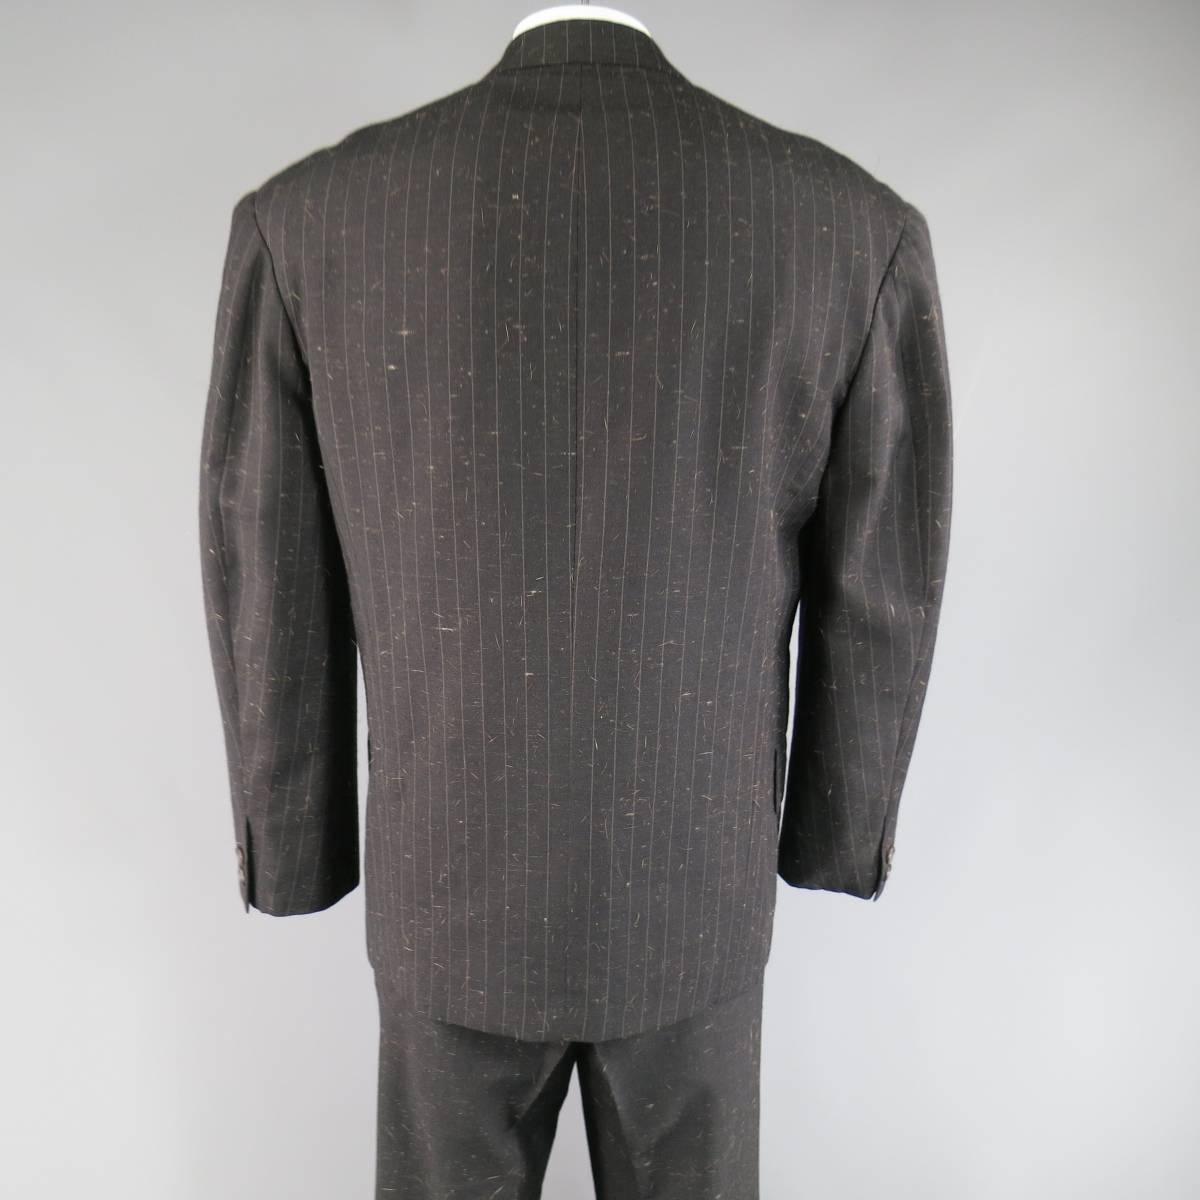 Yohji Yamamoto Charcoal Hair Textured Wool Blend Striped Double Breasted Suit 2